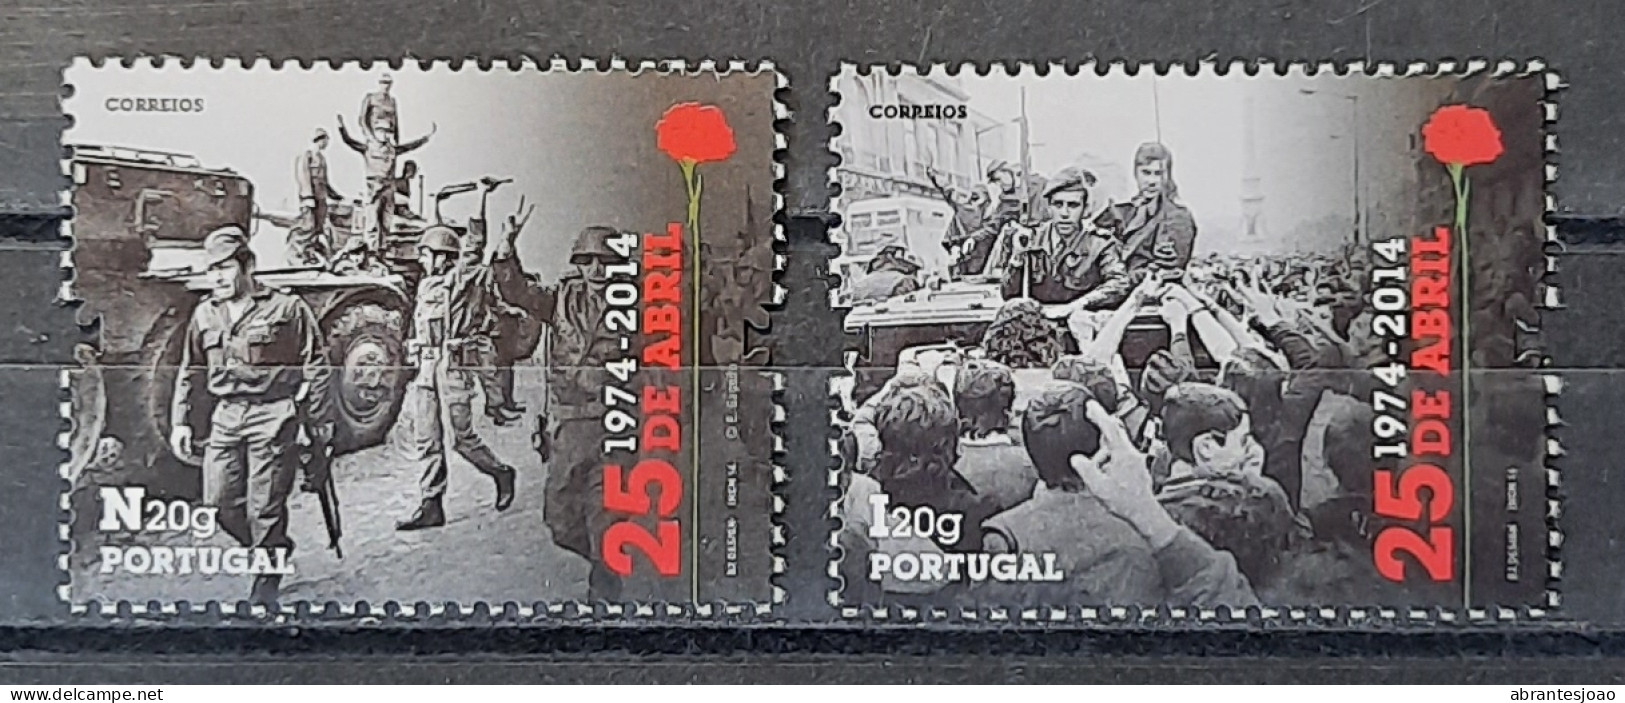 2014 - Portugal - 40 Years Of 25th April Revolution - MNH - 2 Stamps + Souvenir Sheet Of 1 Stamp - Neufs